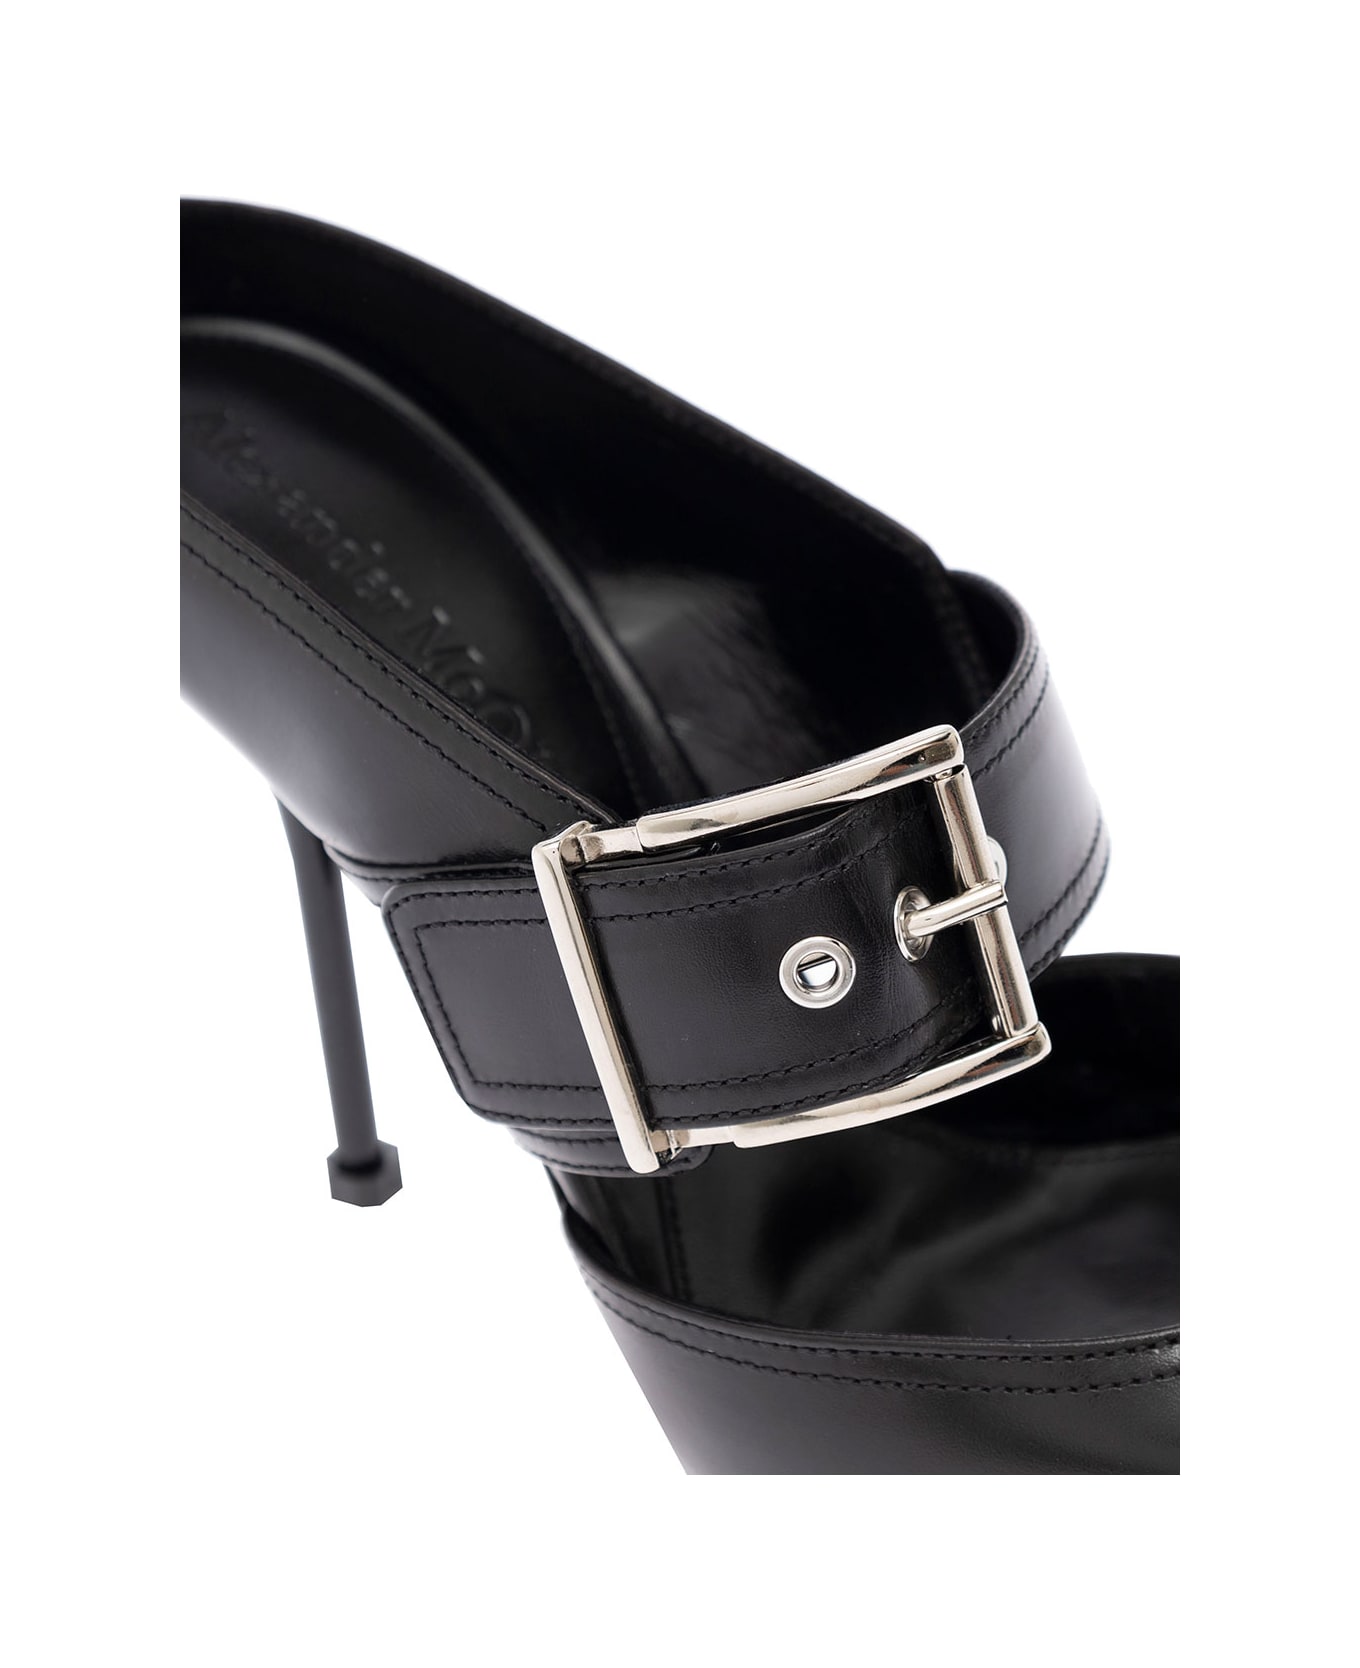 Alexander McQueen Woman's Black Patent Leather Mules With Metal Toe And Buckle - Black